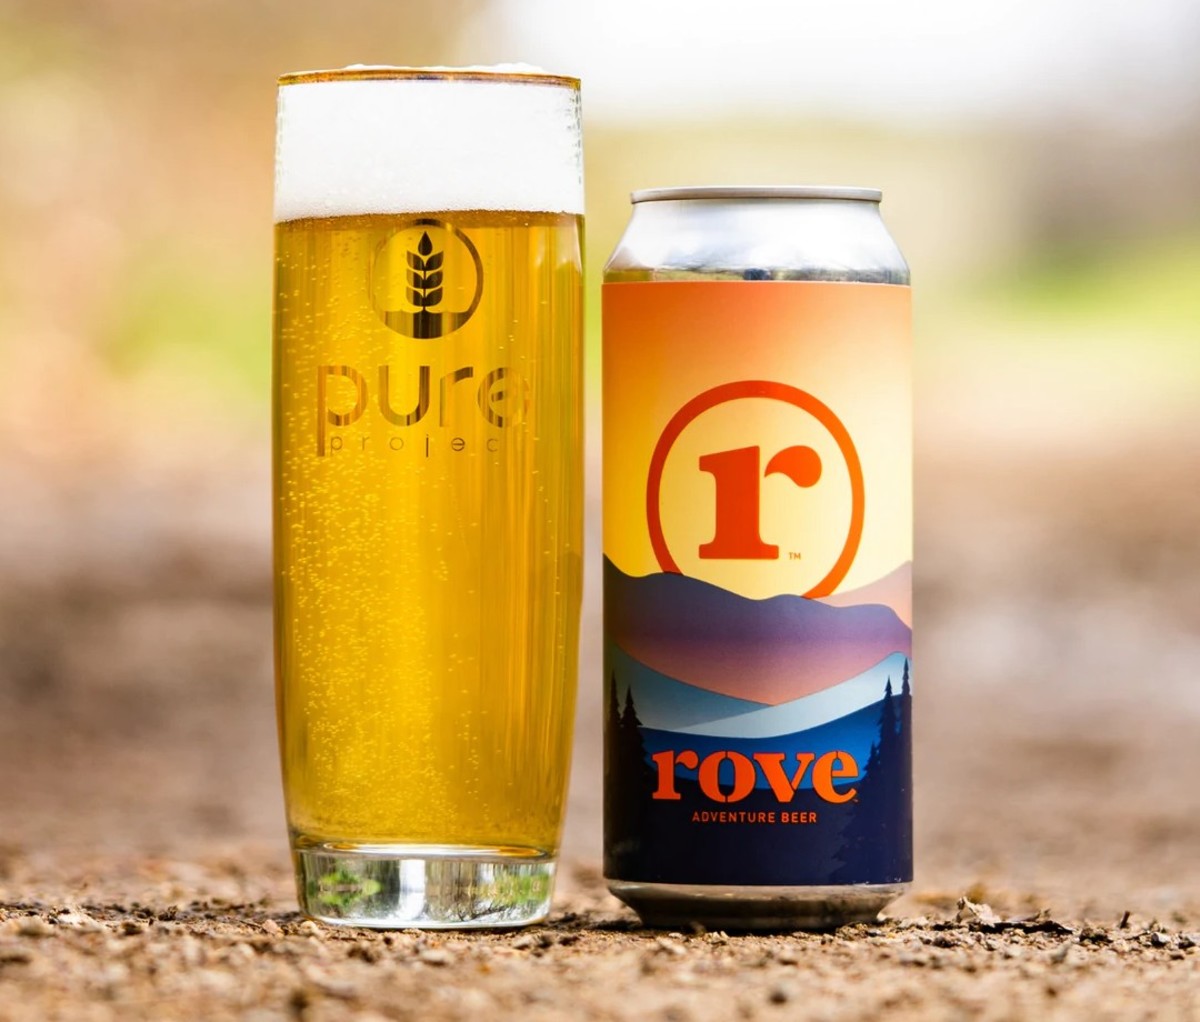 Can of Rove Adventure Beer beside a tall pint glass.